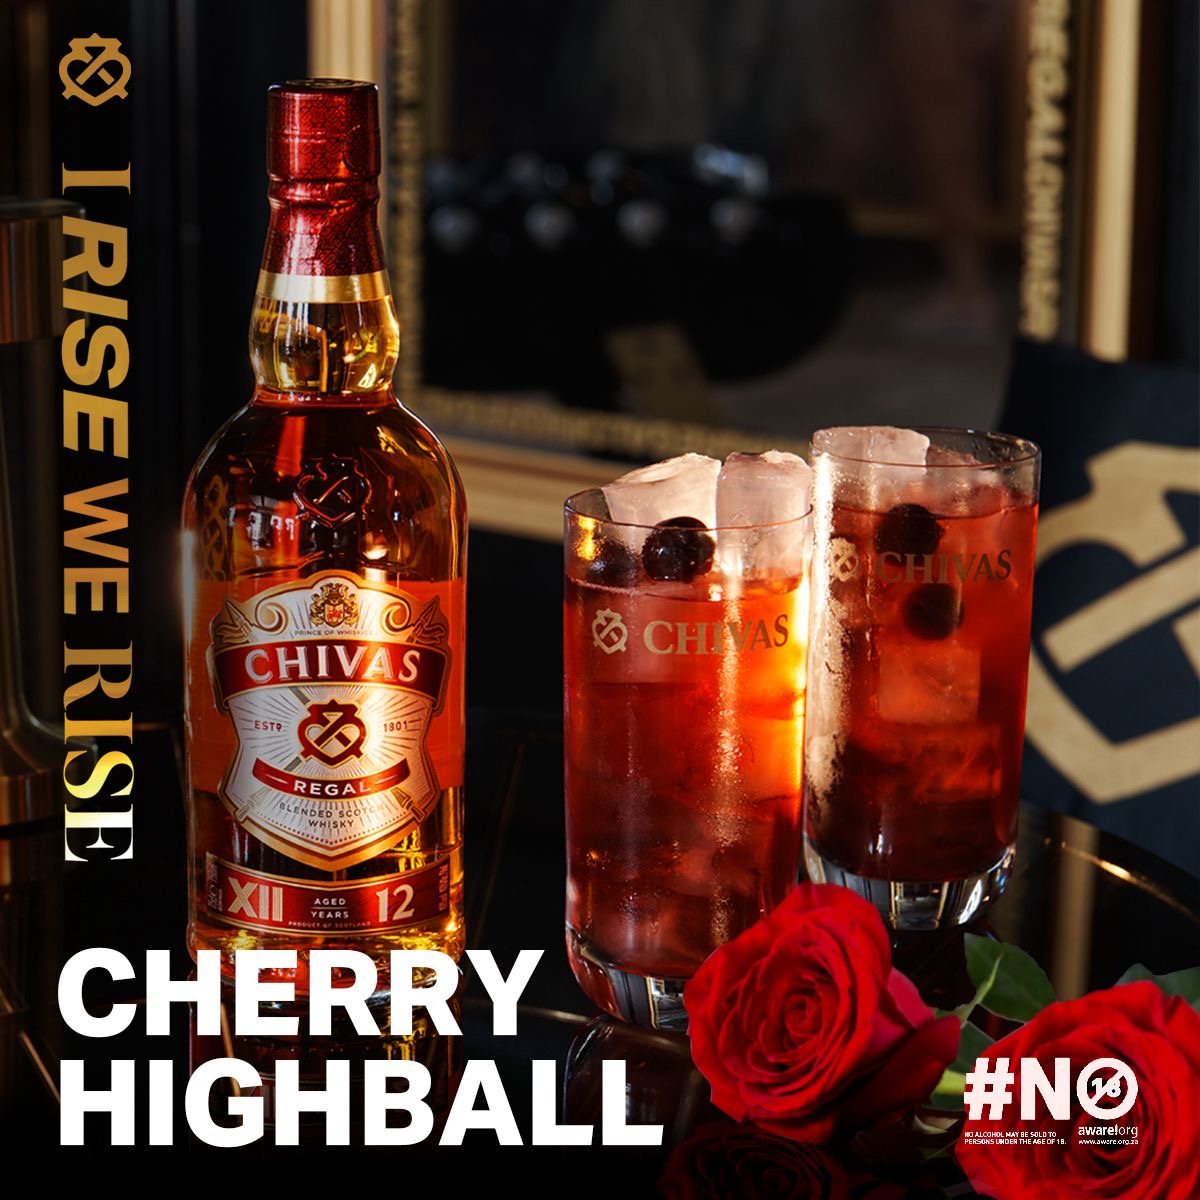 🥃 Sip, savour and say cheers to love this Valentine's month. ​ Tag your whisky-loving partner in crime! ​ ​#IRiseWeRise #ChivasRegalSA #ChivasRegal​ chivas.com/en-za/cocktail…